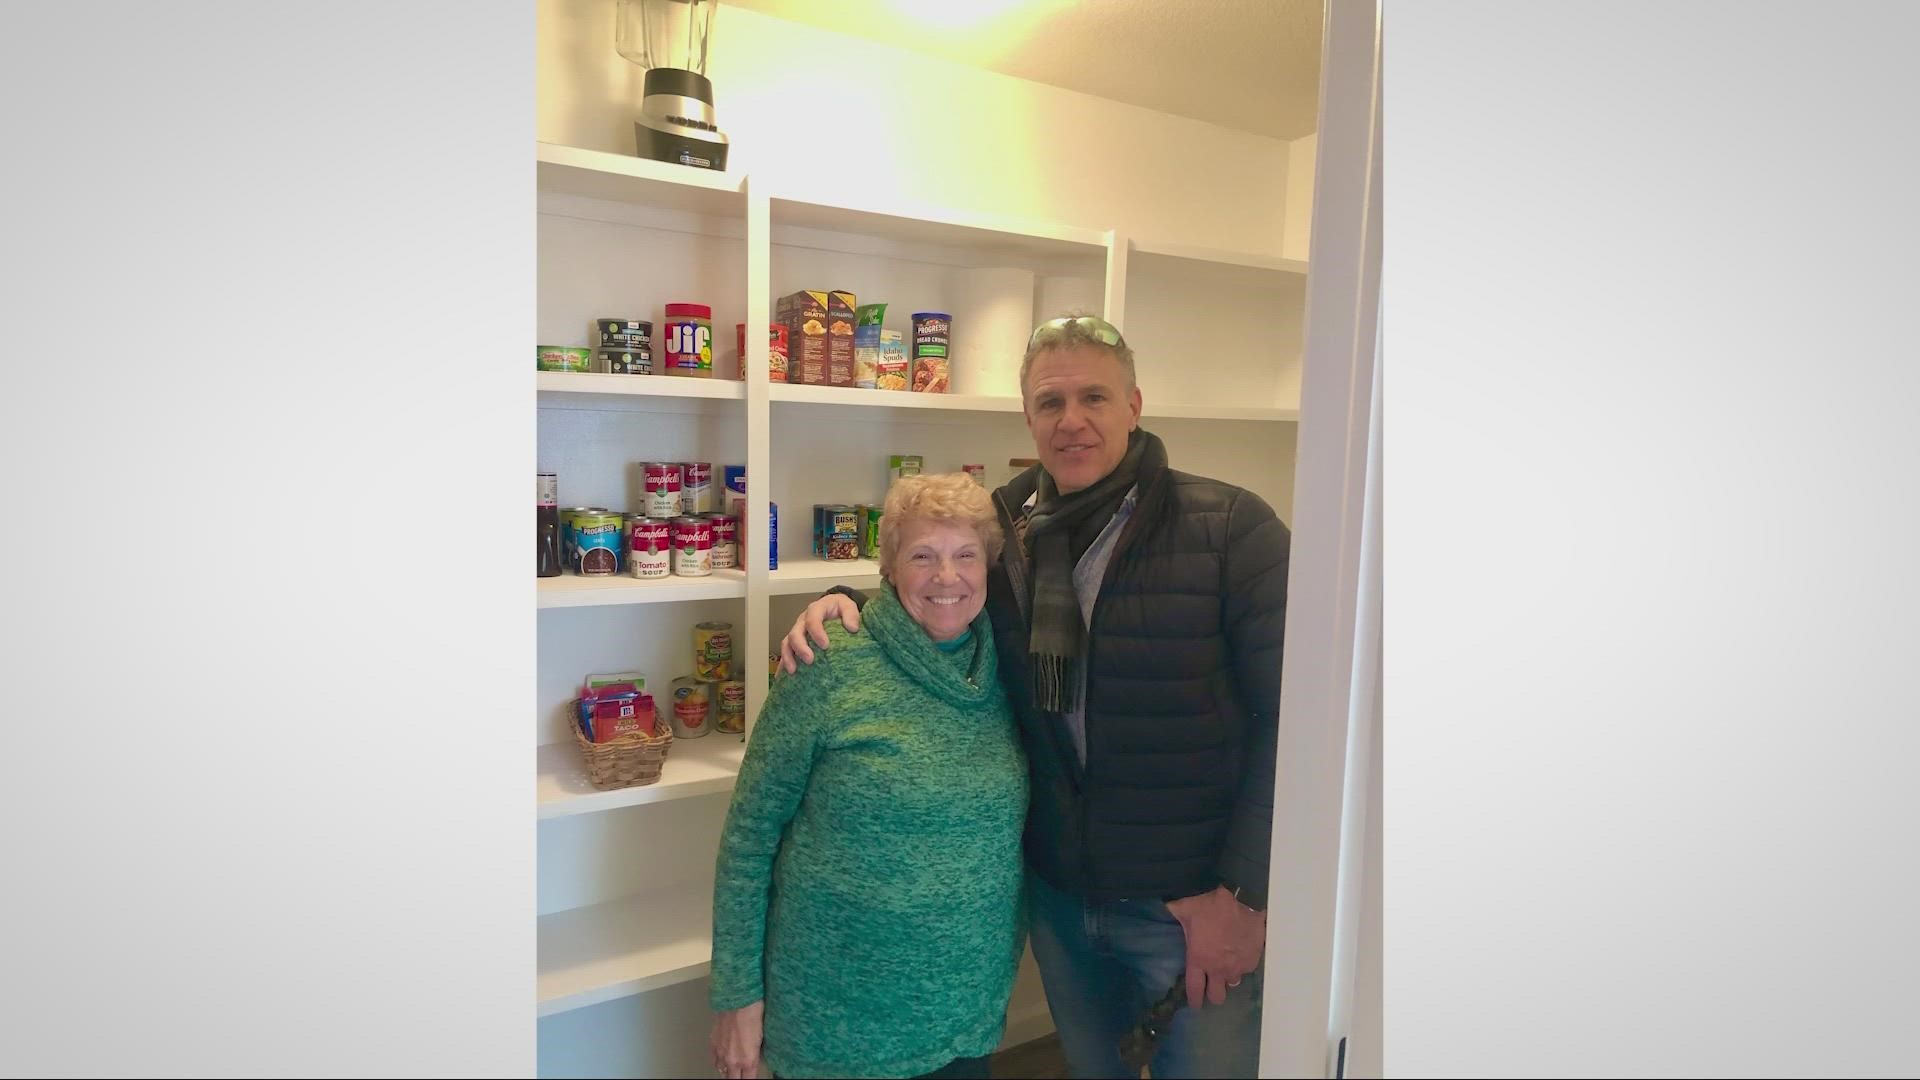 On today's Jay D-I-Y, Jay visits Sandusky to surprise his mom with a new pantry.